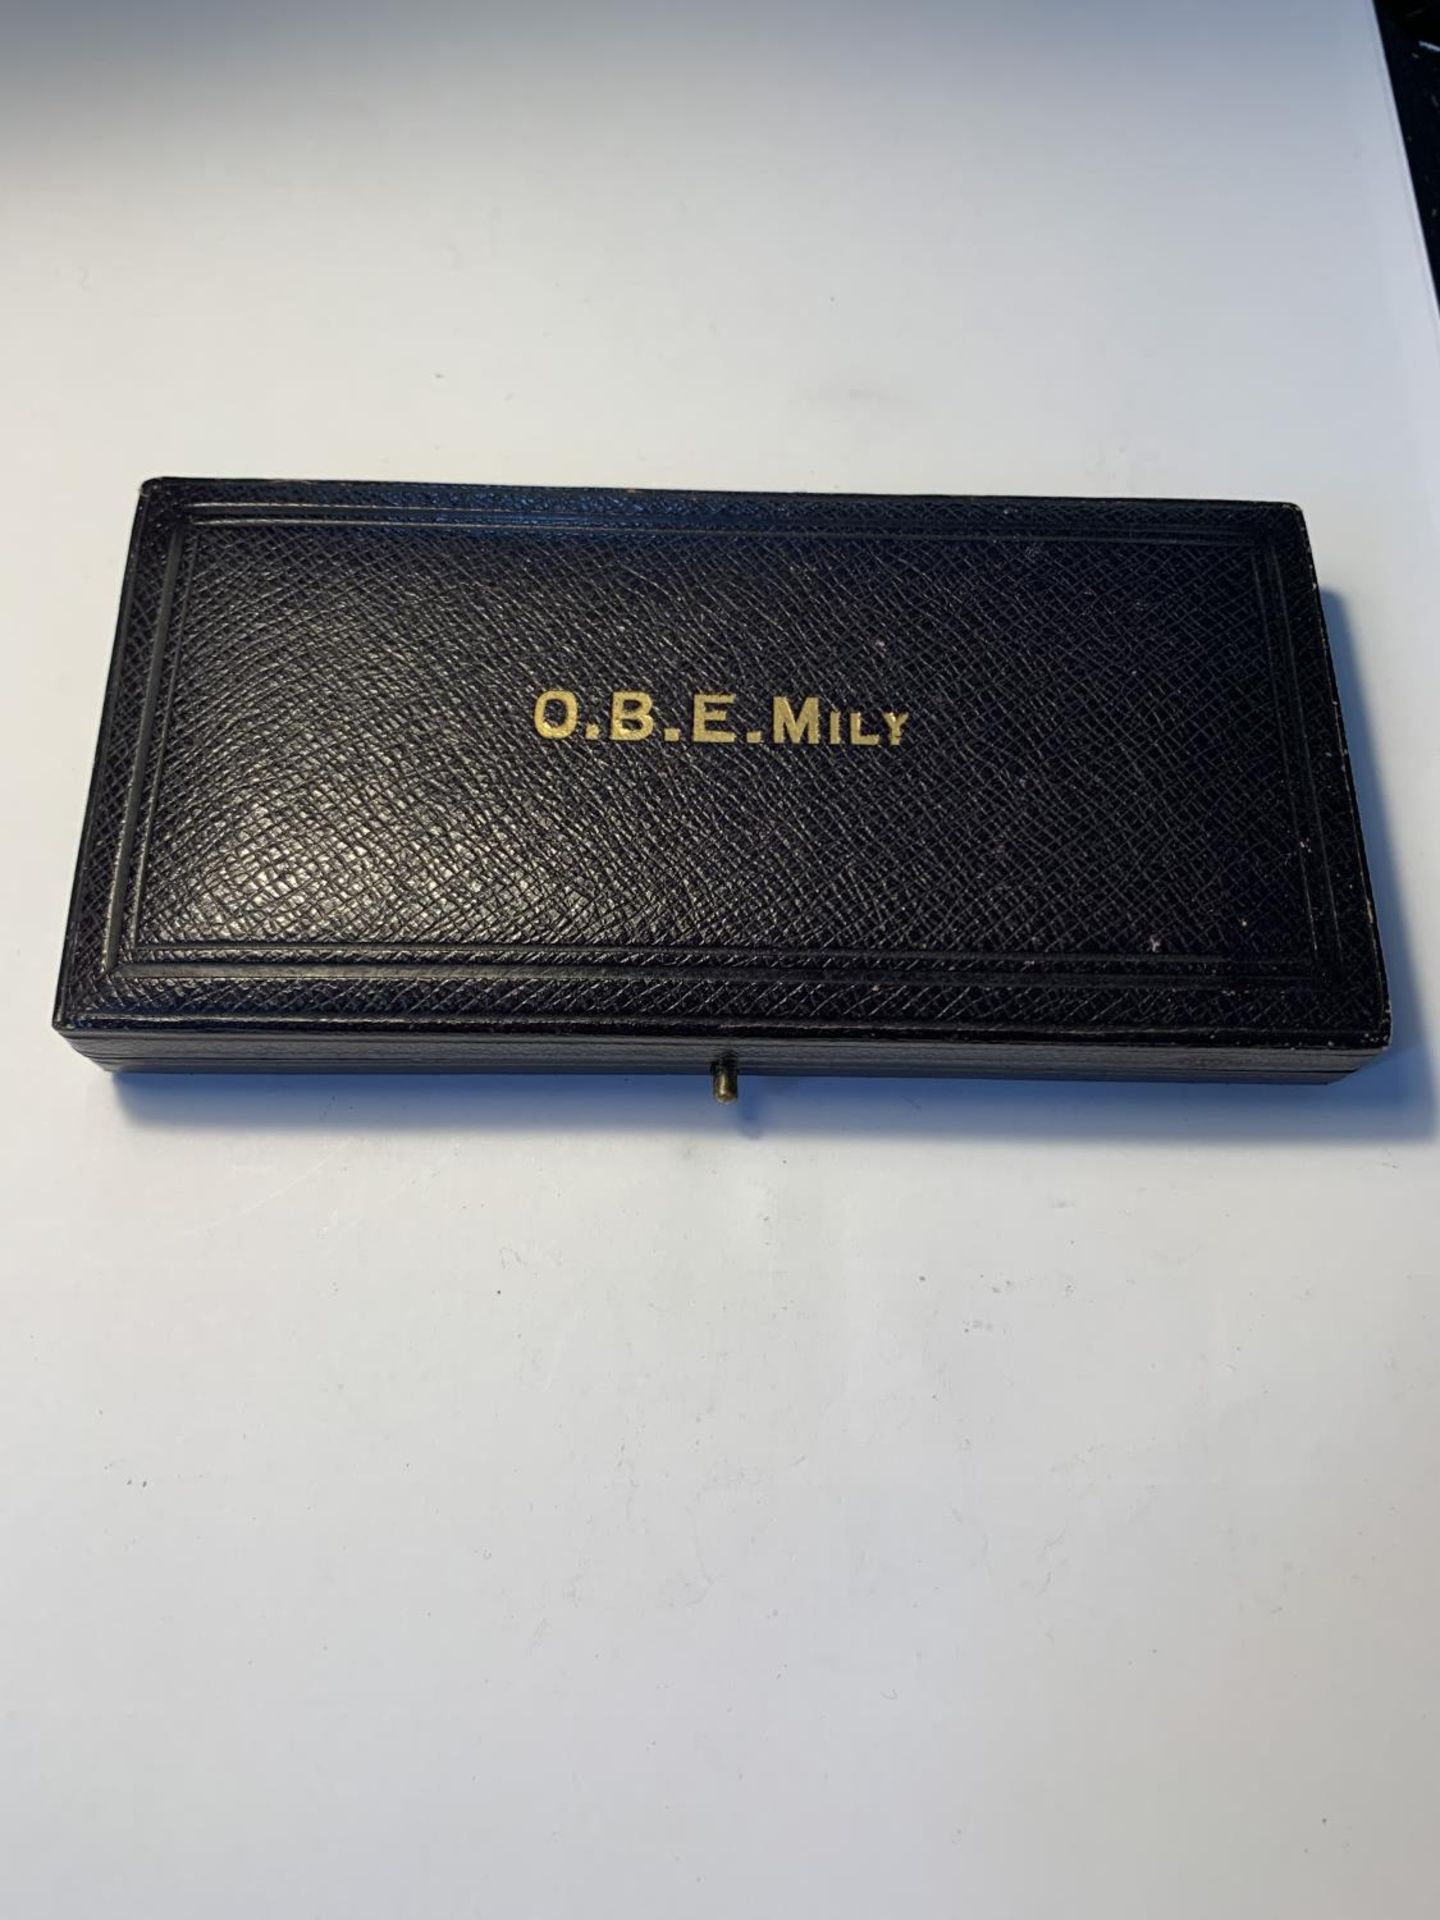 A HALLMARKED SILVER OBE MEDAL IN FITTED GARRARD AND CO CASE WITH GILT TOOLING TO THE LID O.B.E. MILY - Image 6 of 6